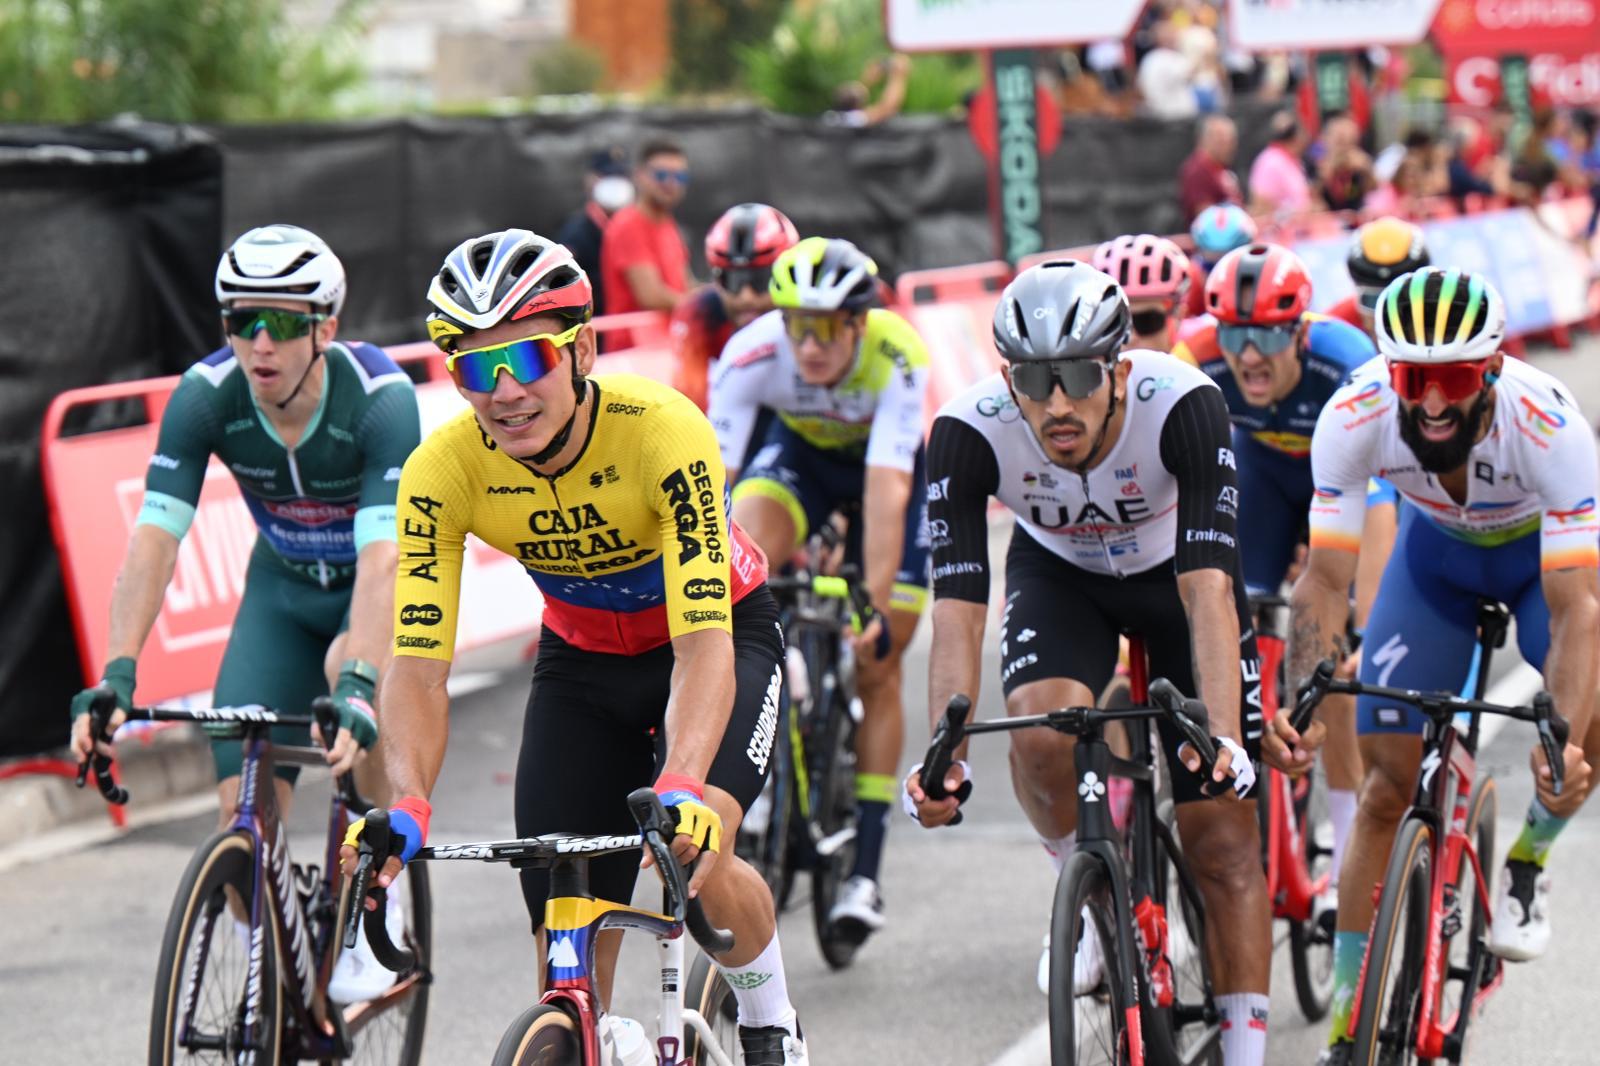 Orluis Aular wins in Croatia and is the leader with one day left – International Cycling